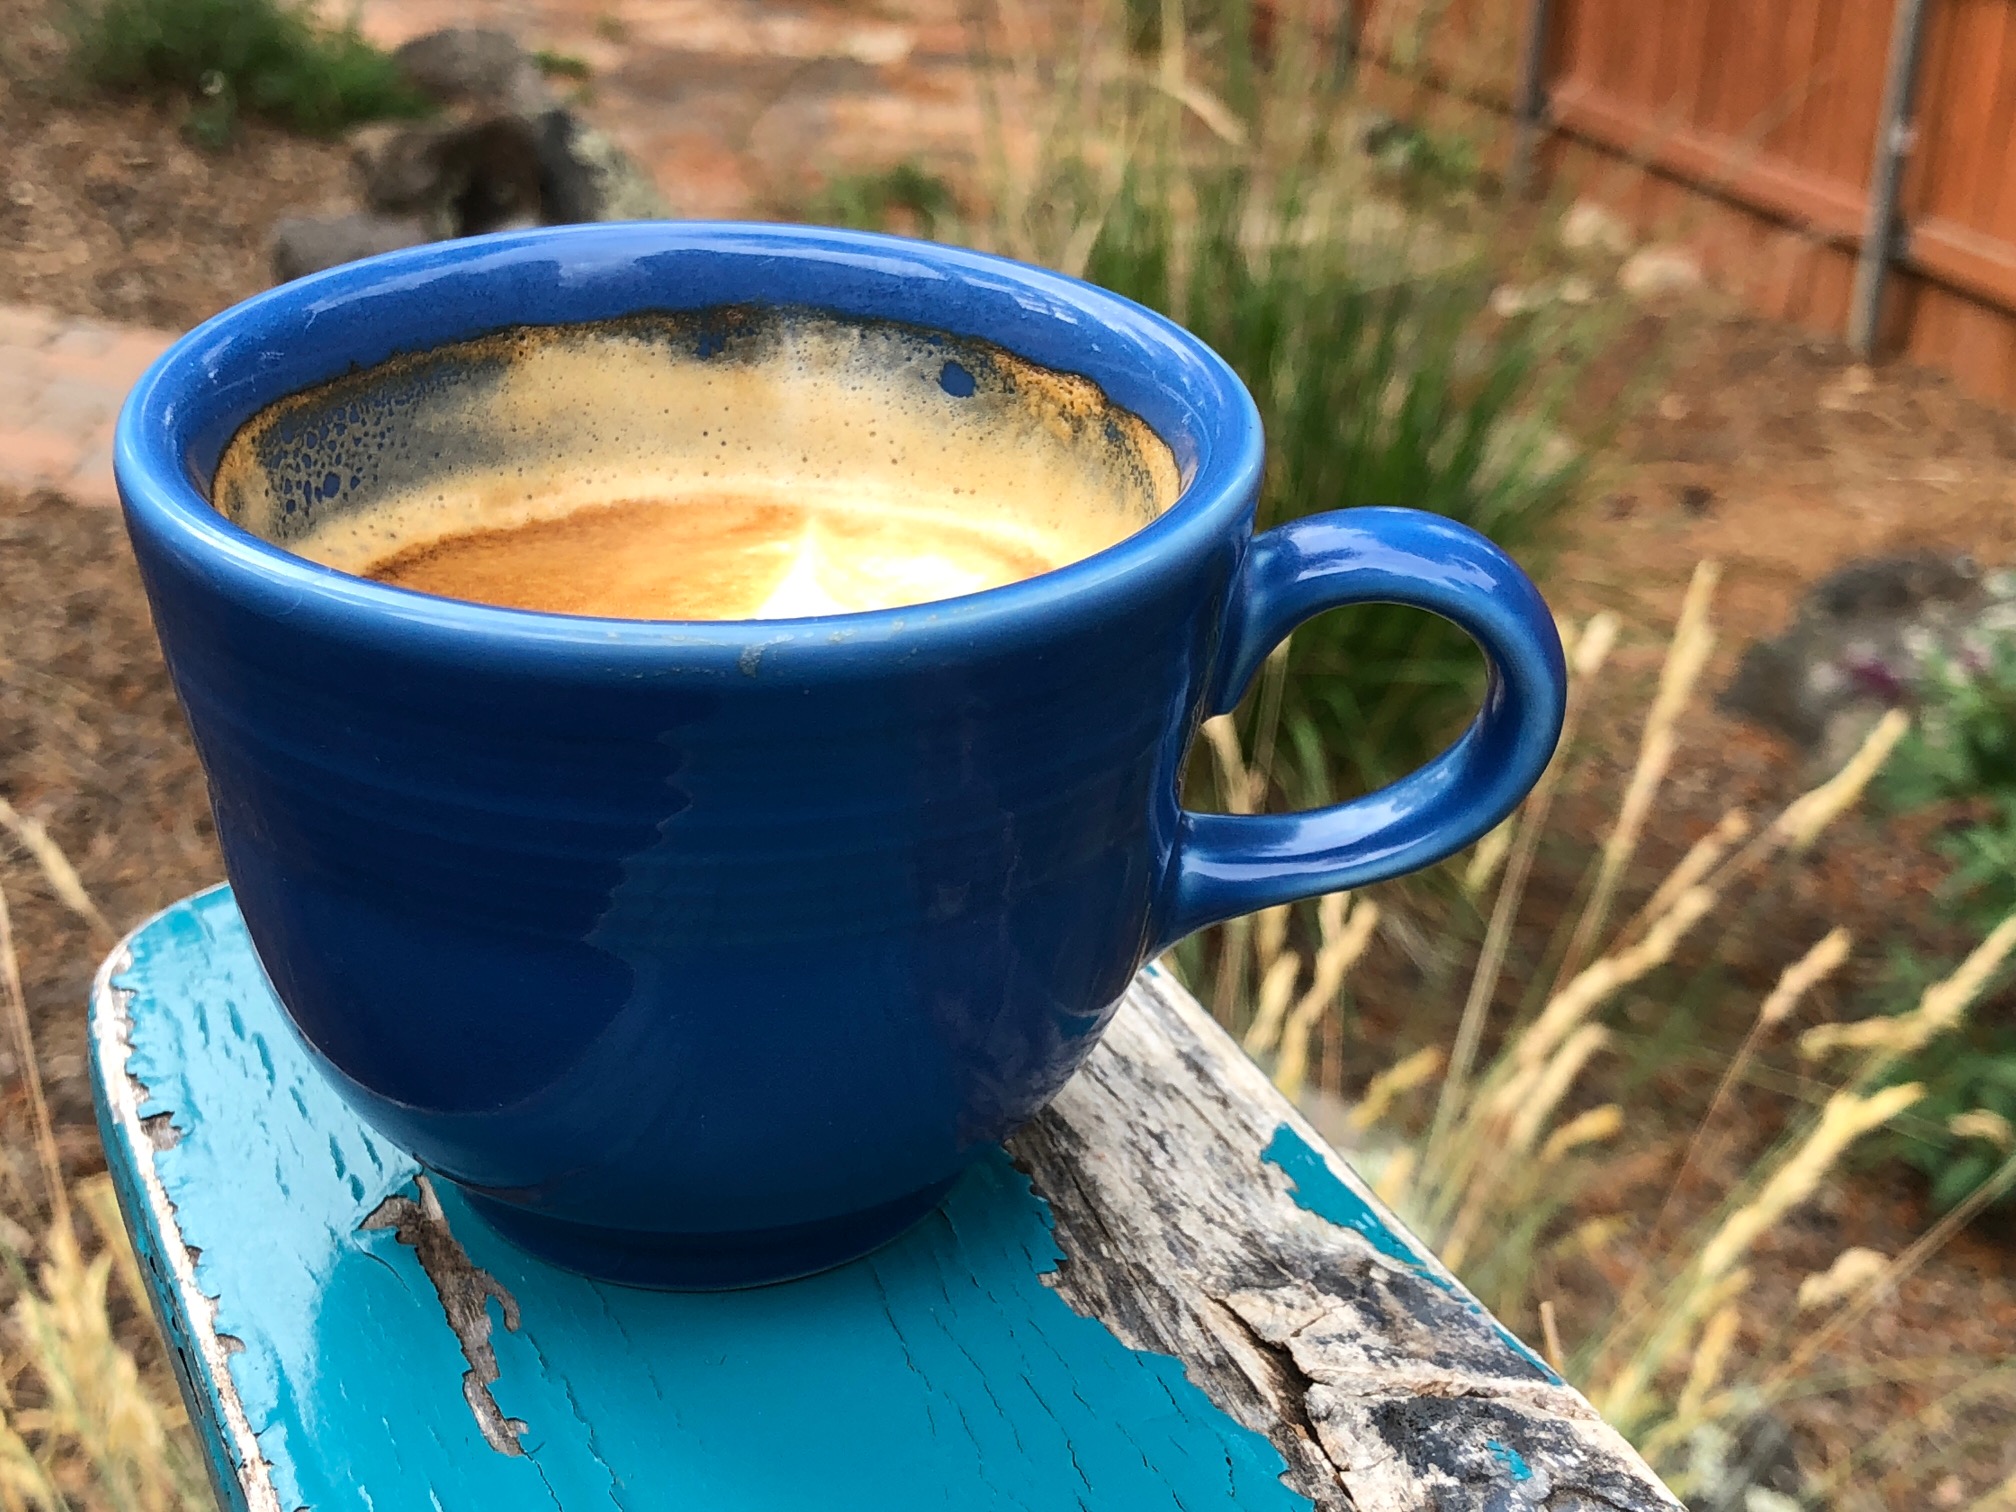 Photo of a blue cappuccino cup on a worn blue armrest of an outdoor chair.  